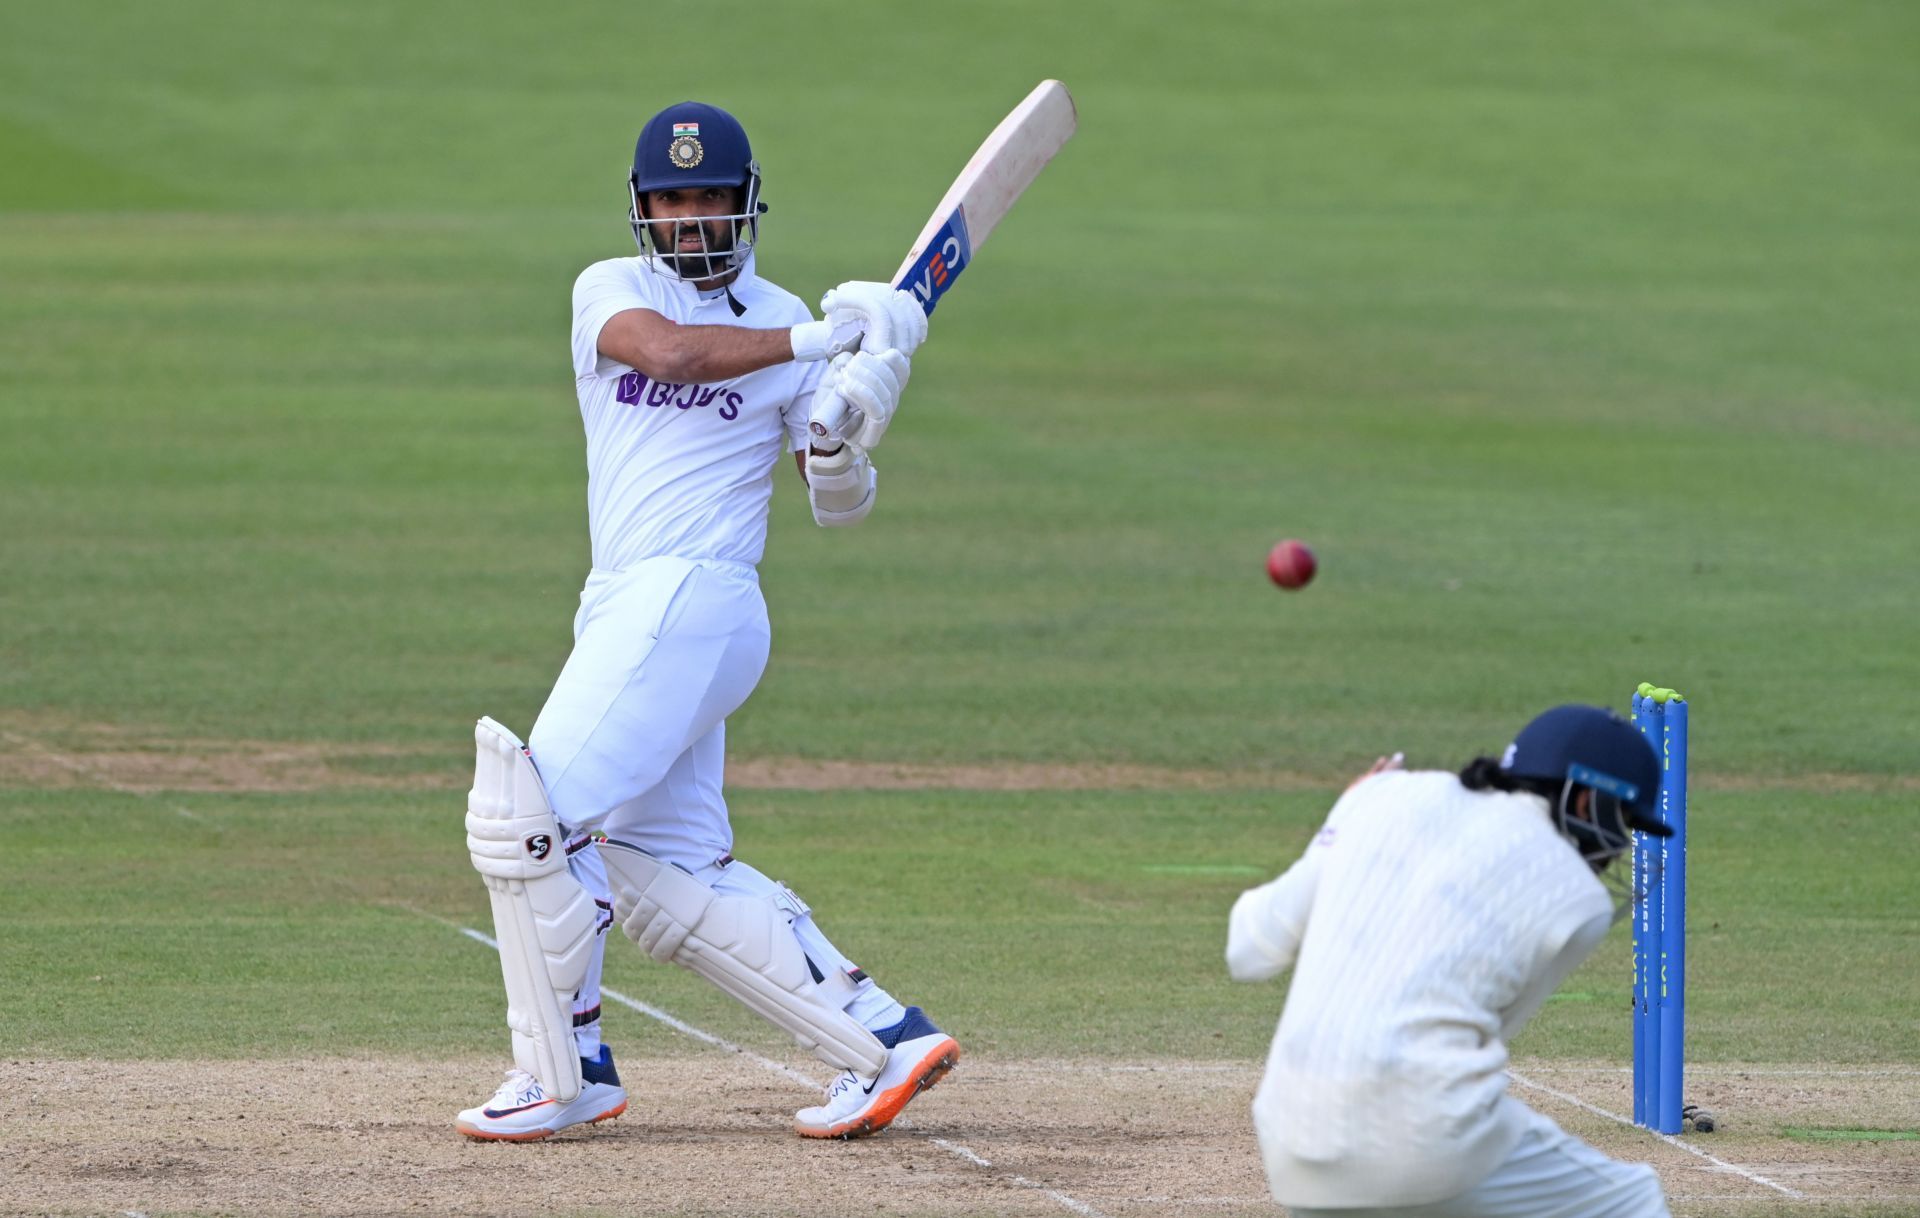 England vs India - Second LV= Insurance Test Match: Day Four (Image: Getty)